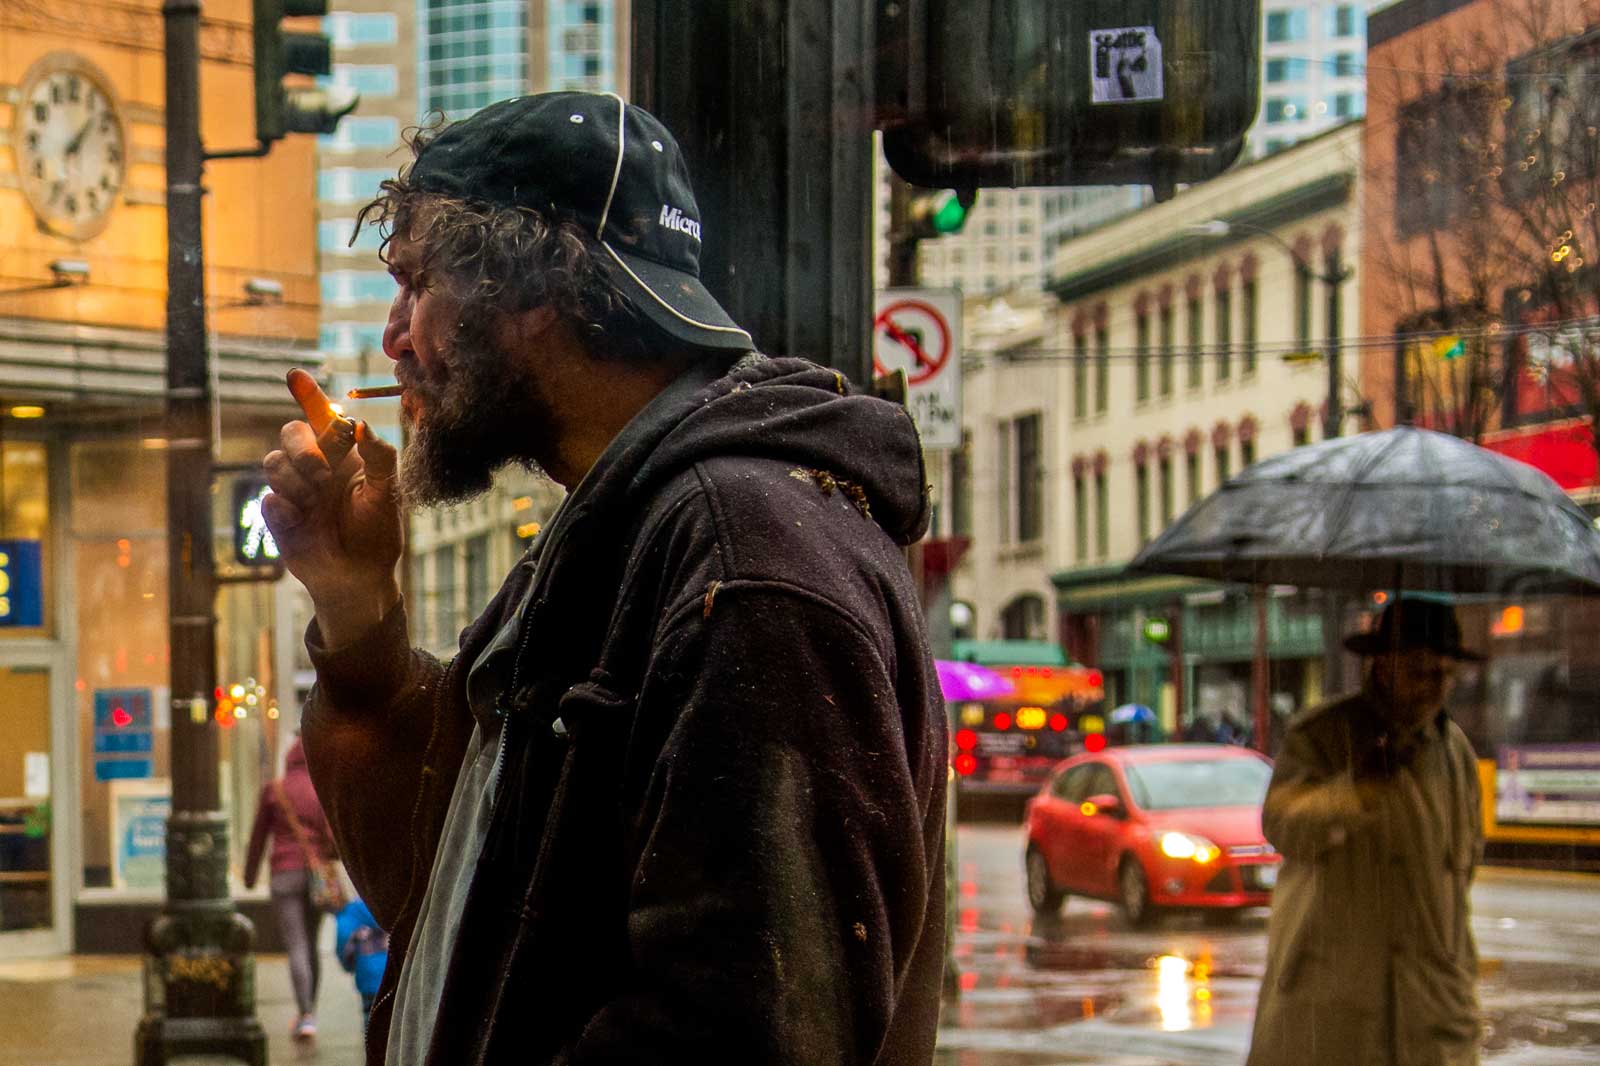 scruffy man lights a cigarette on the sidewalk as people walk and drive by on rainy streets